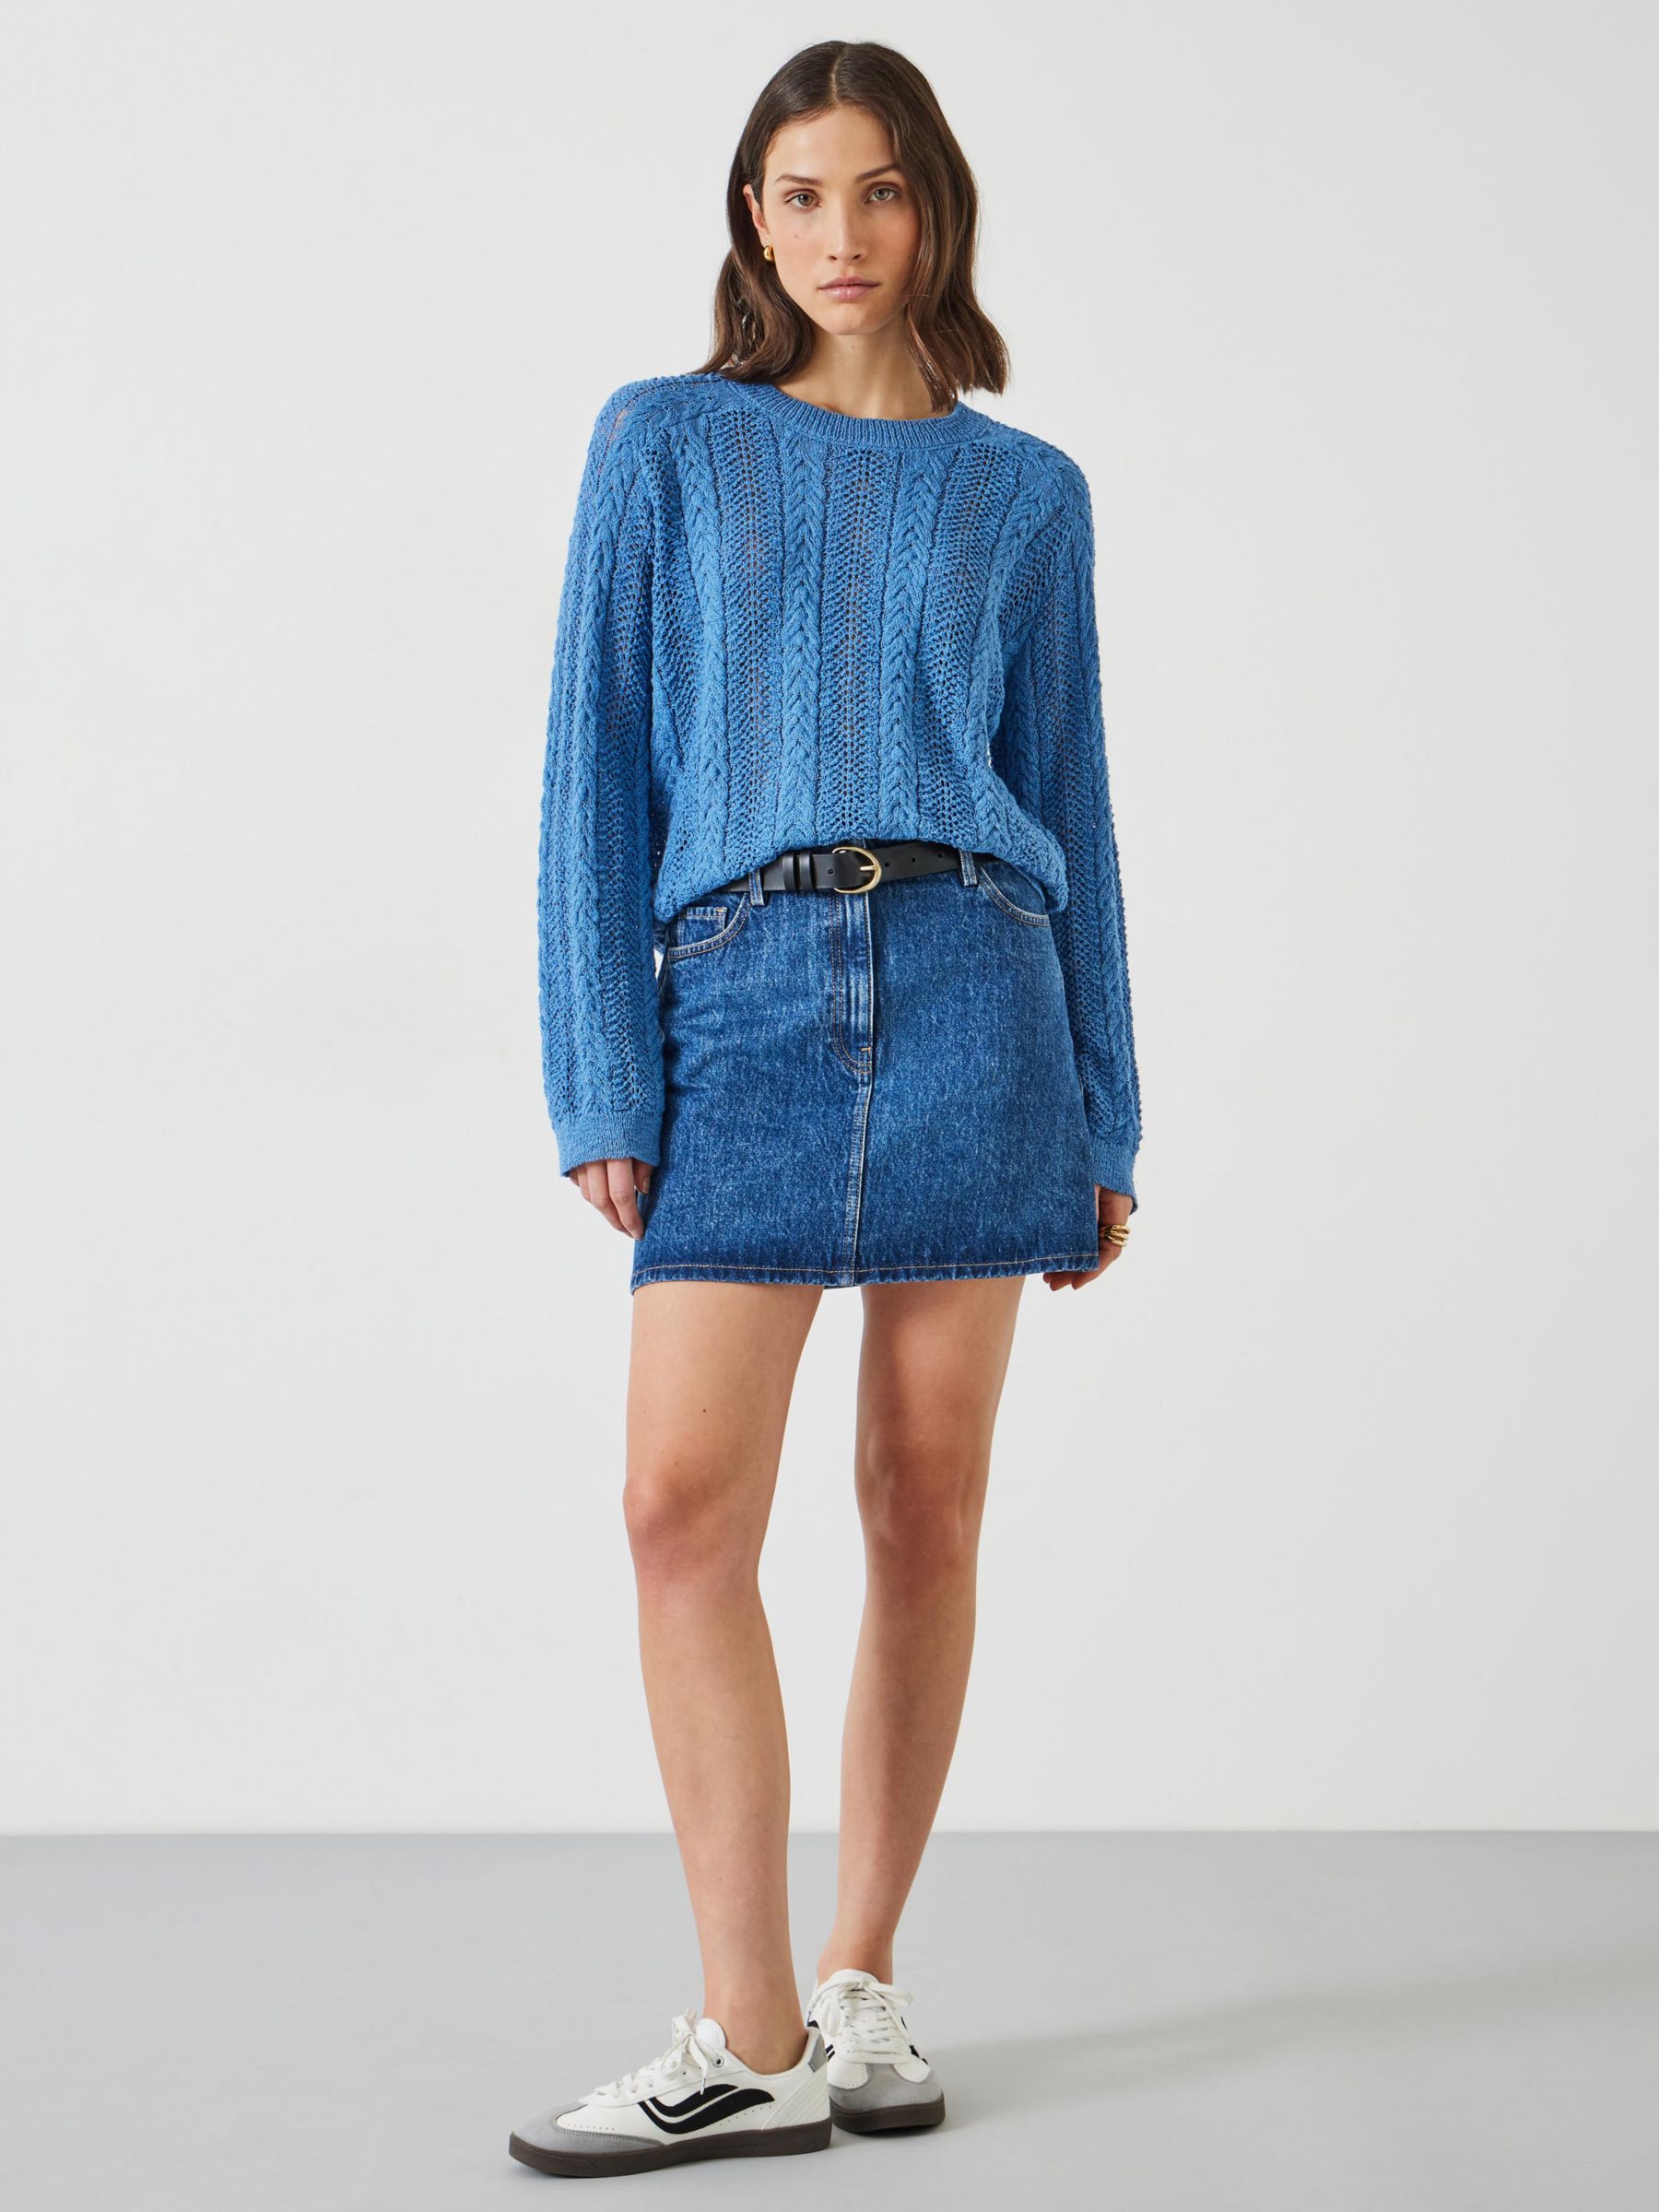 Buy HUSH Dot Open Stitch Cable Crew Jumper, Blue Online at johnlewis.com